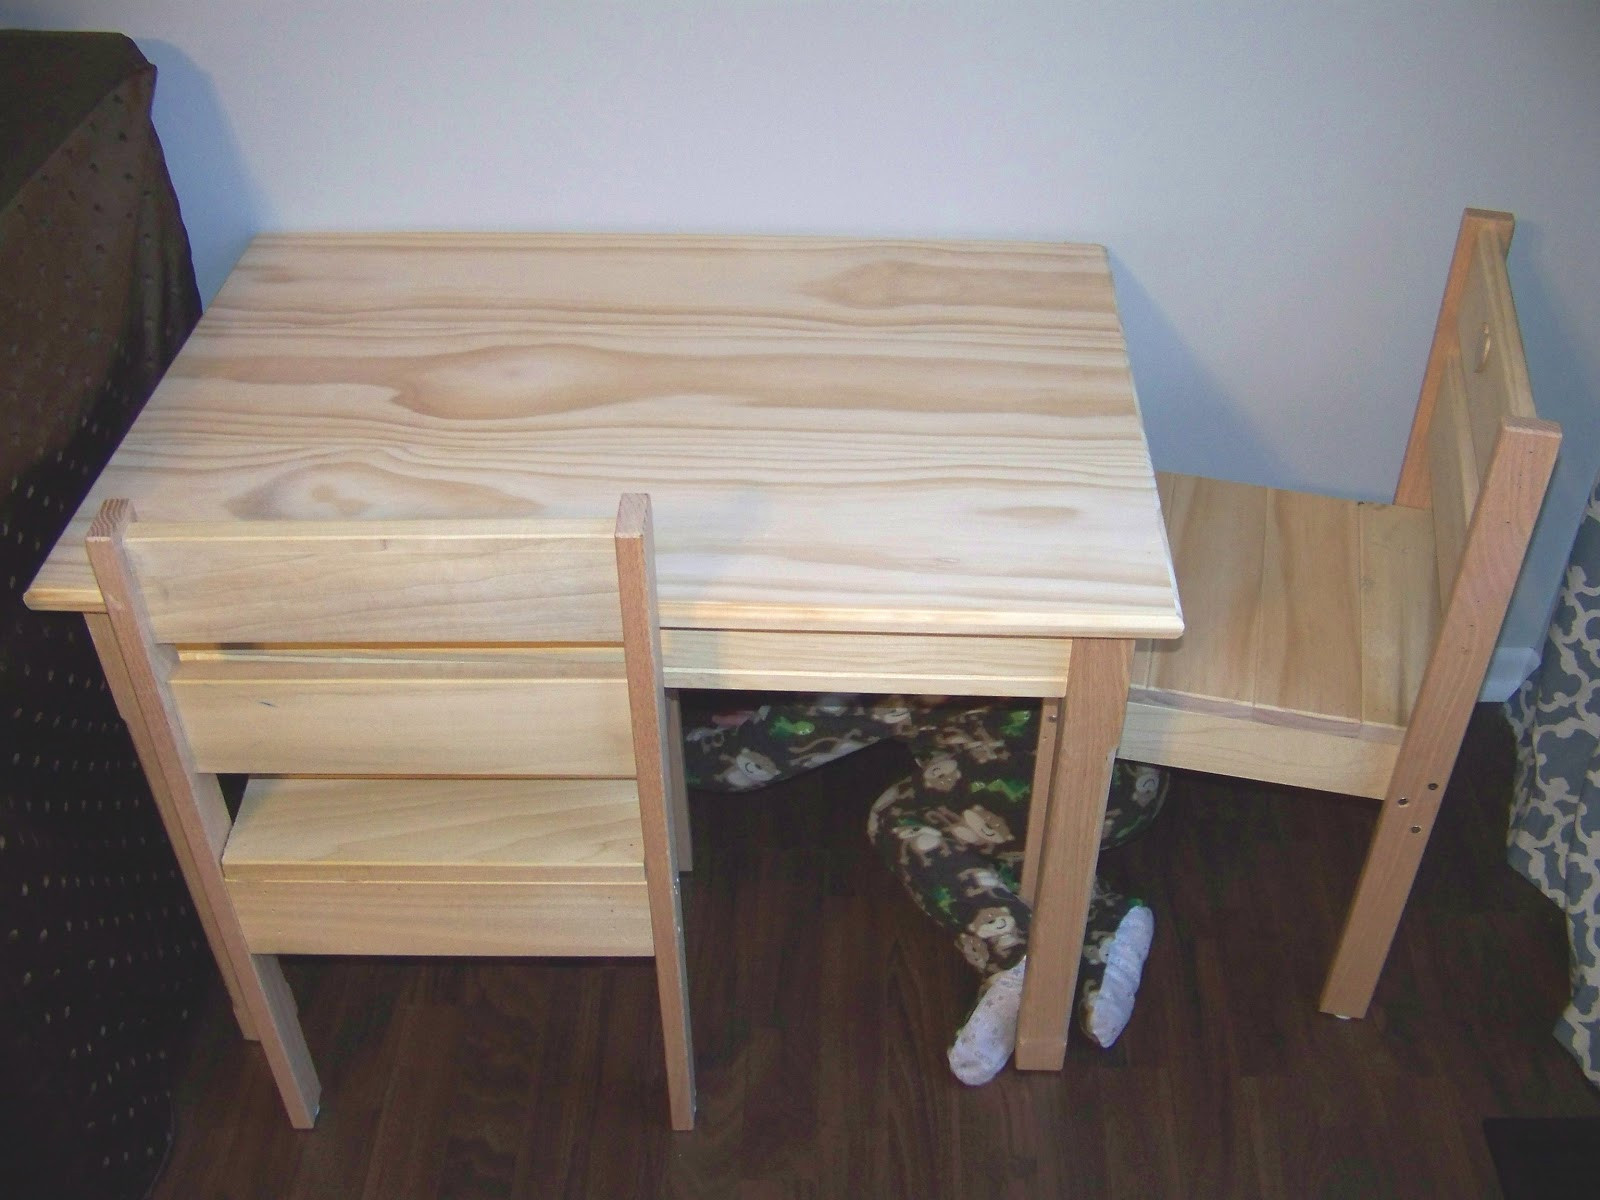 Diy Kids Table And Chairs
 Baby Bear Necessities DIY Kid size Table & Chairs